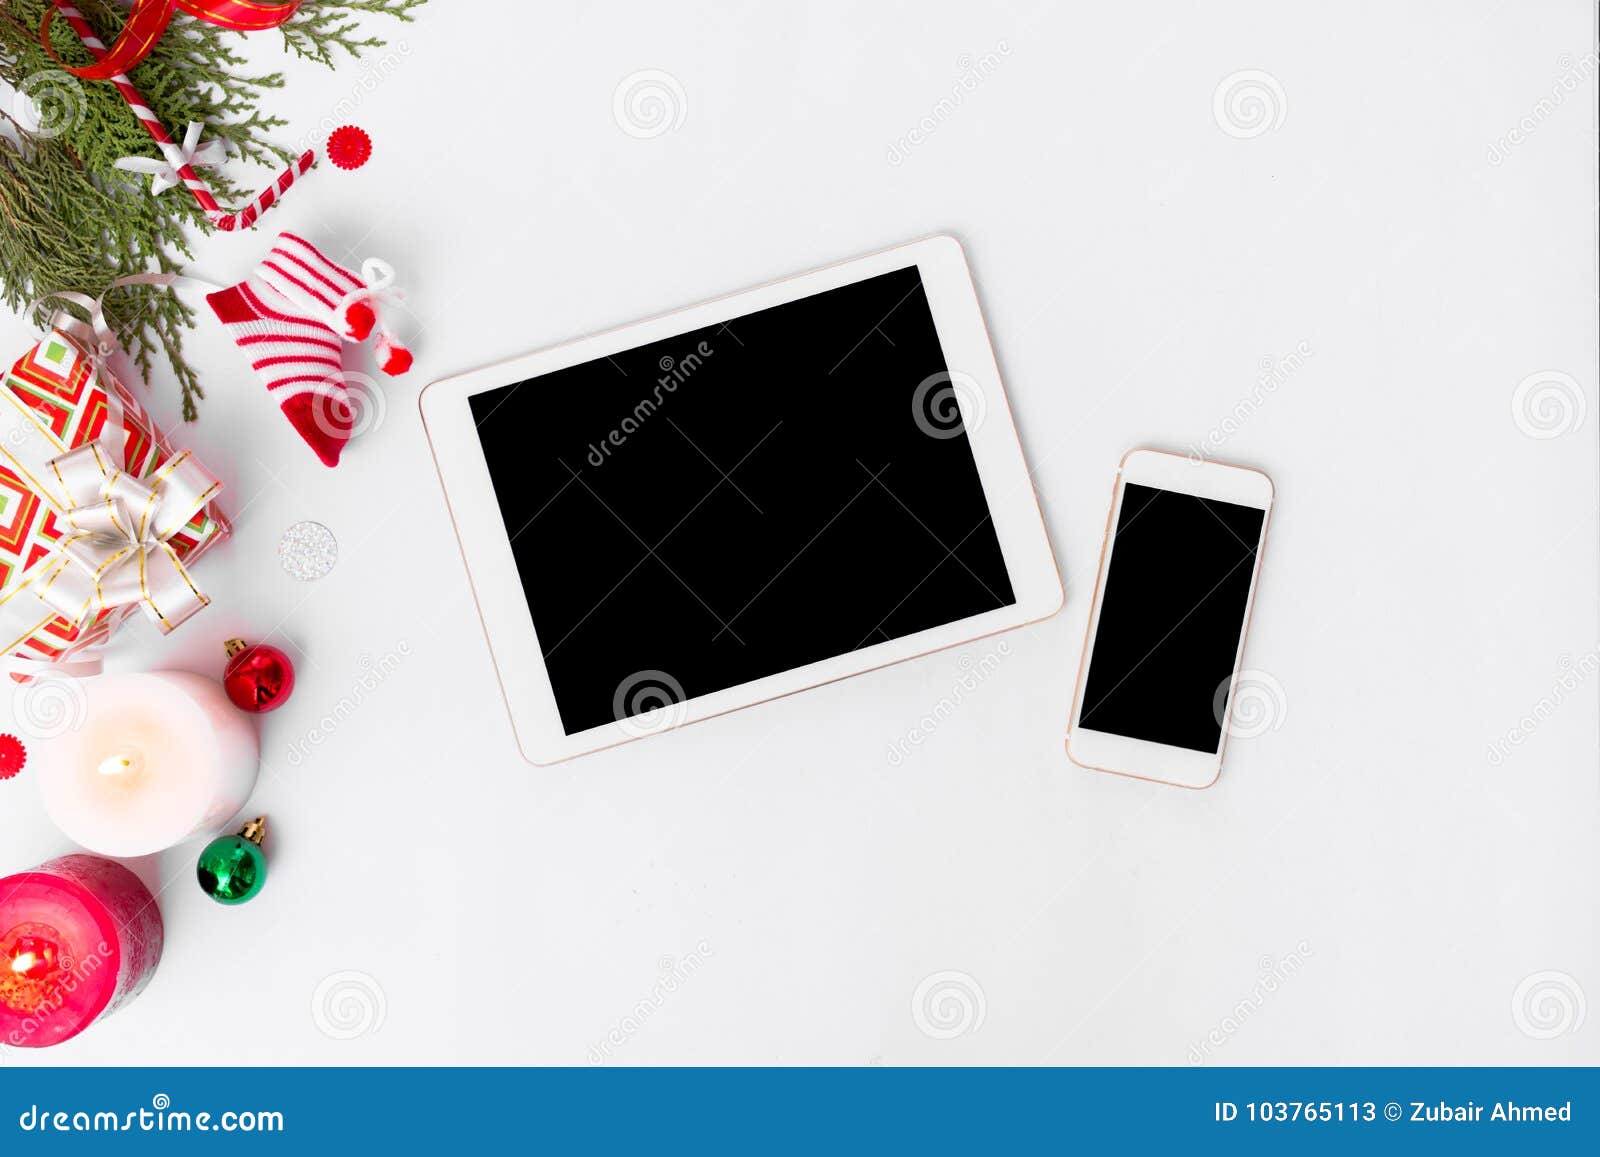 Tablet smartphone christmas position fir branches cones and christmas decorations on white background